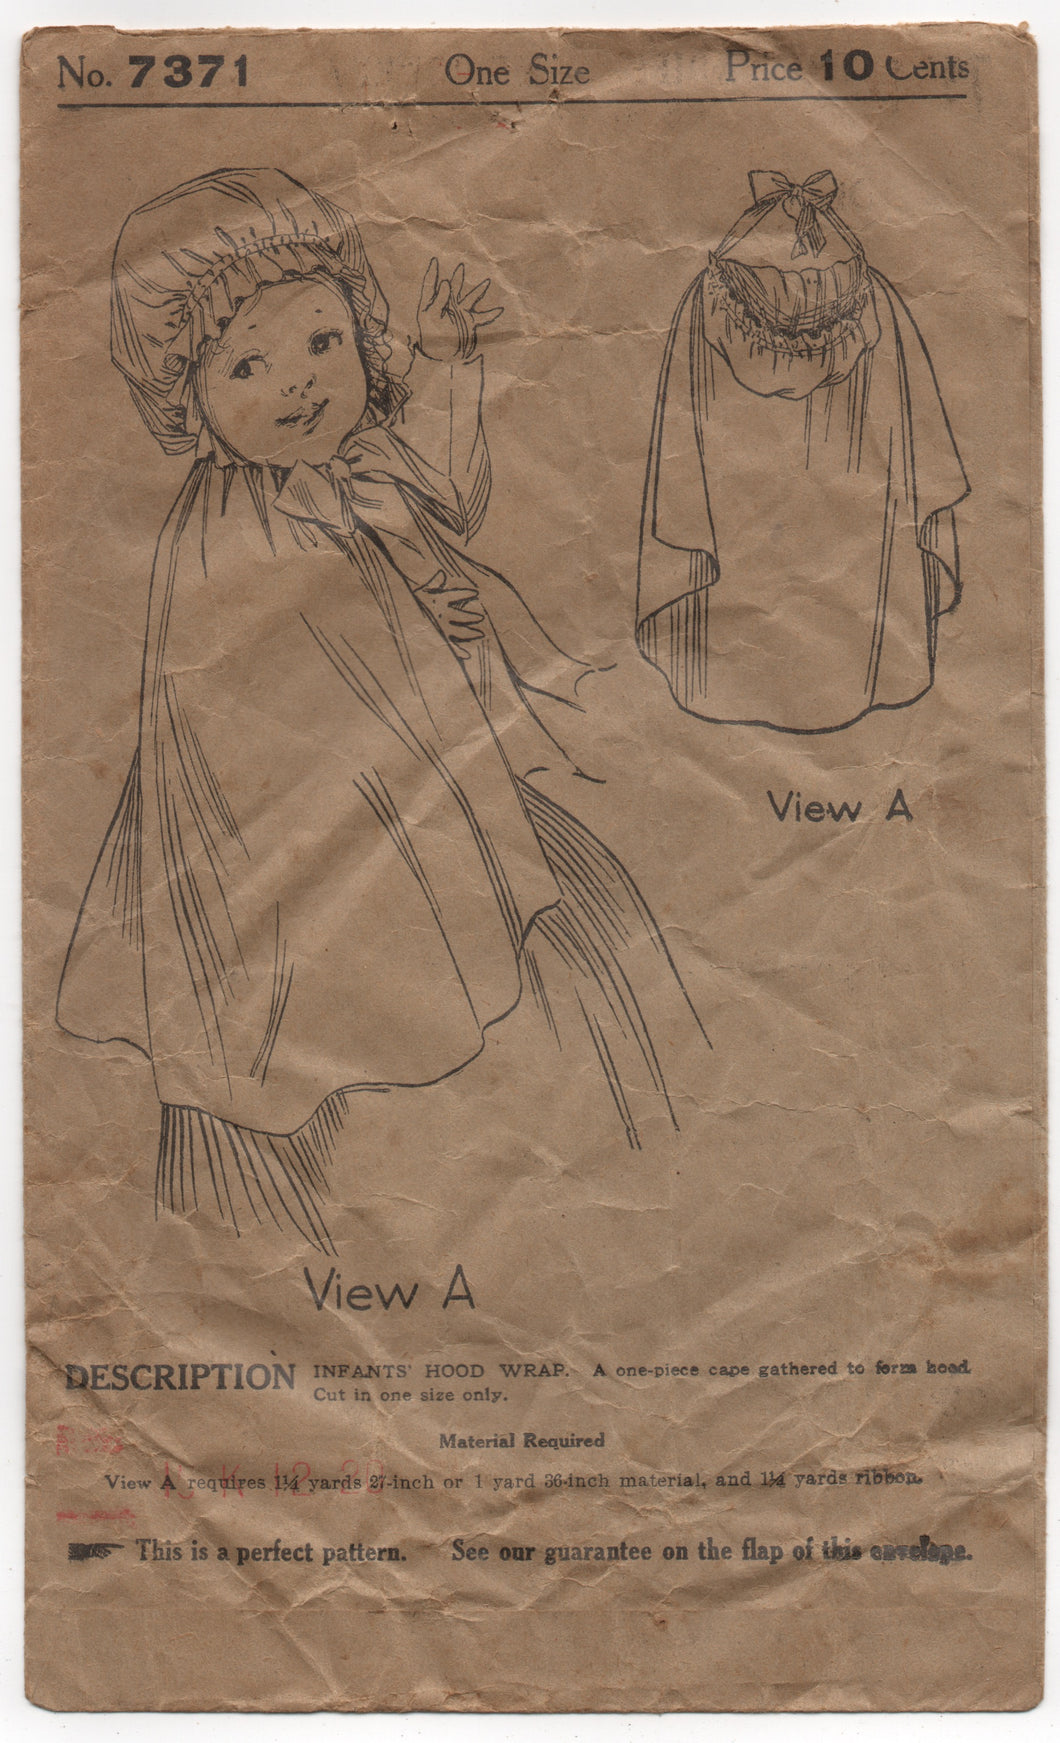 1910's Ladies Home Journal Hooded Wrap for Infants - No. 7371